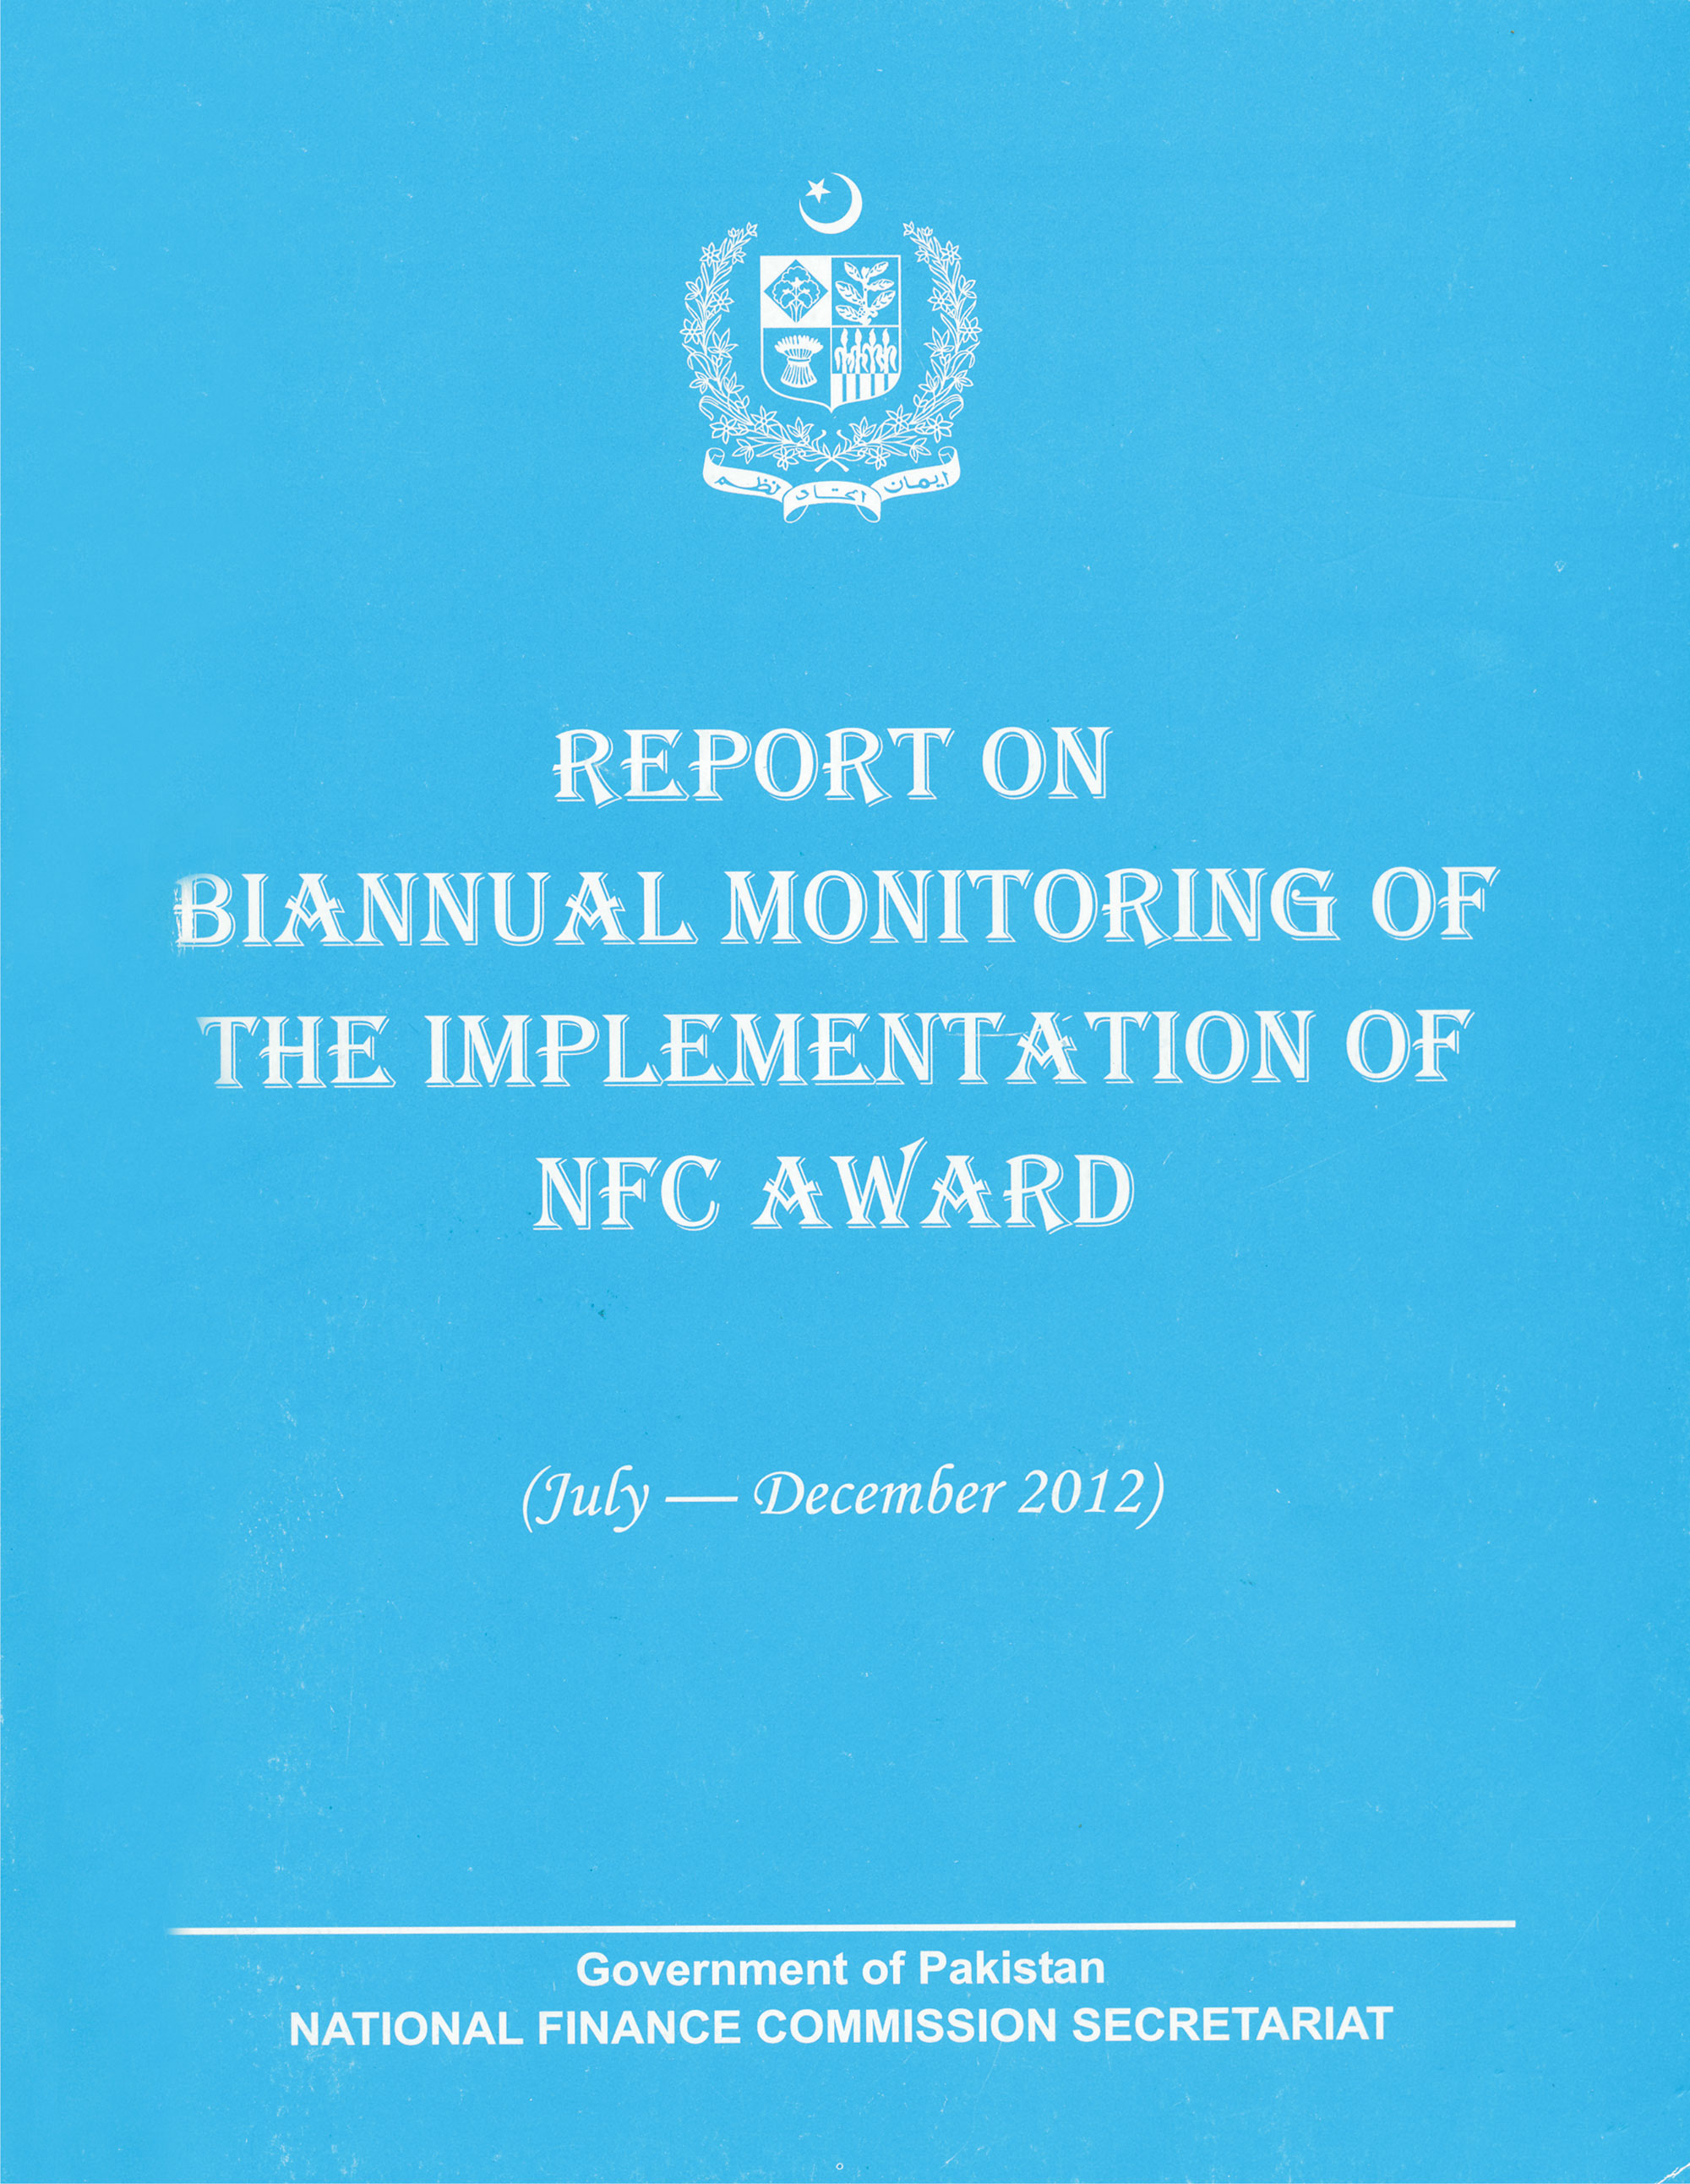 Review of report on the implementation of NFC Award